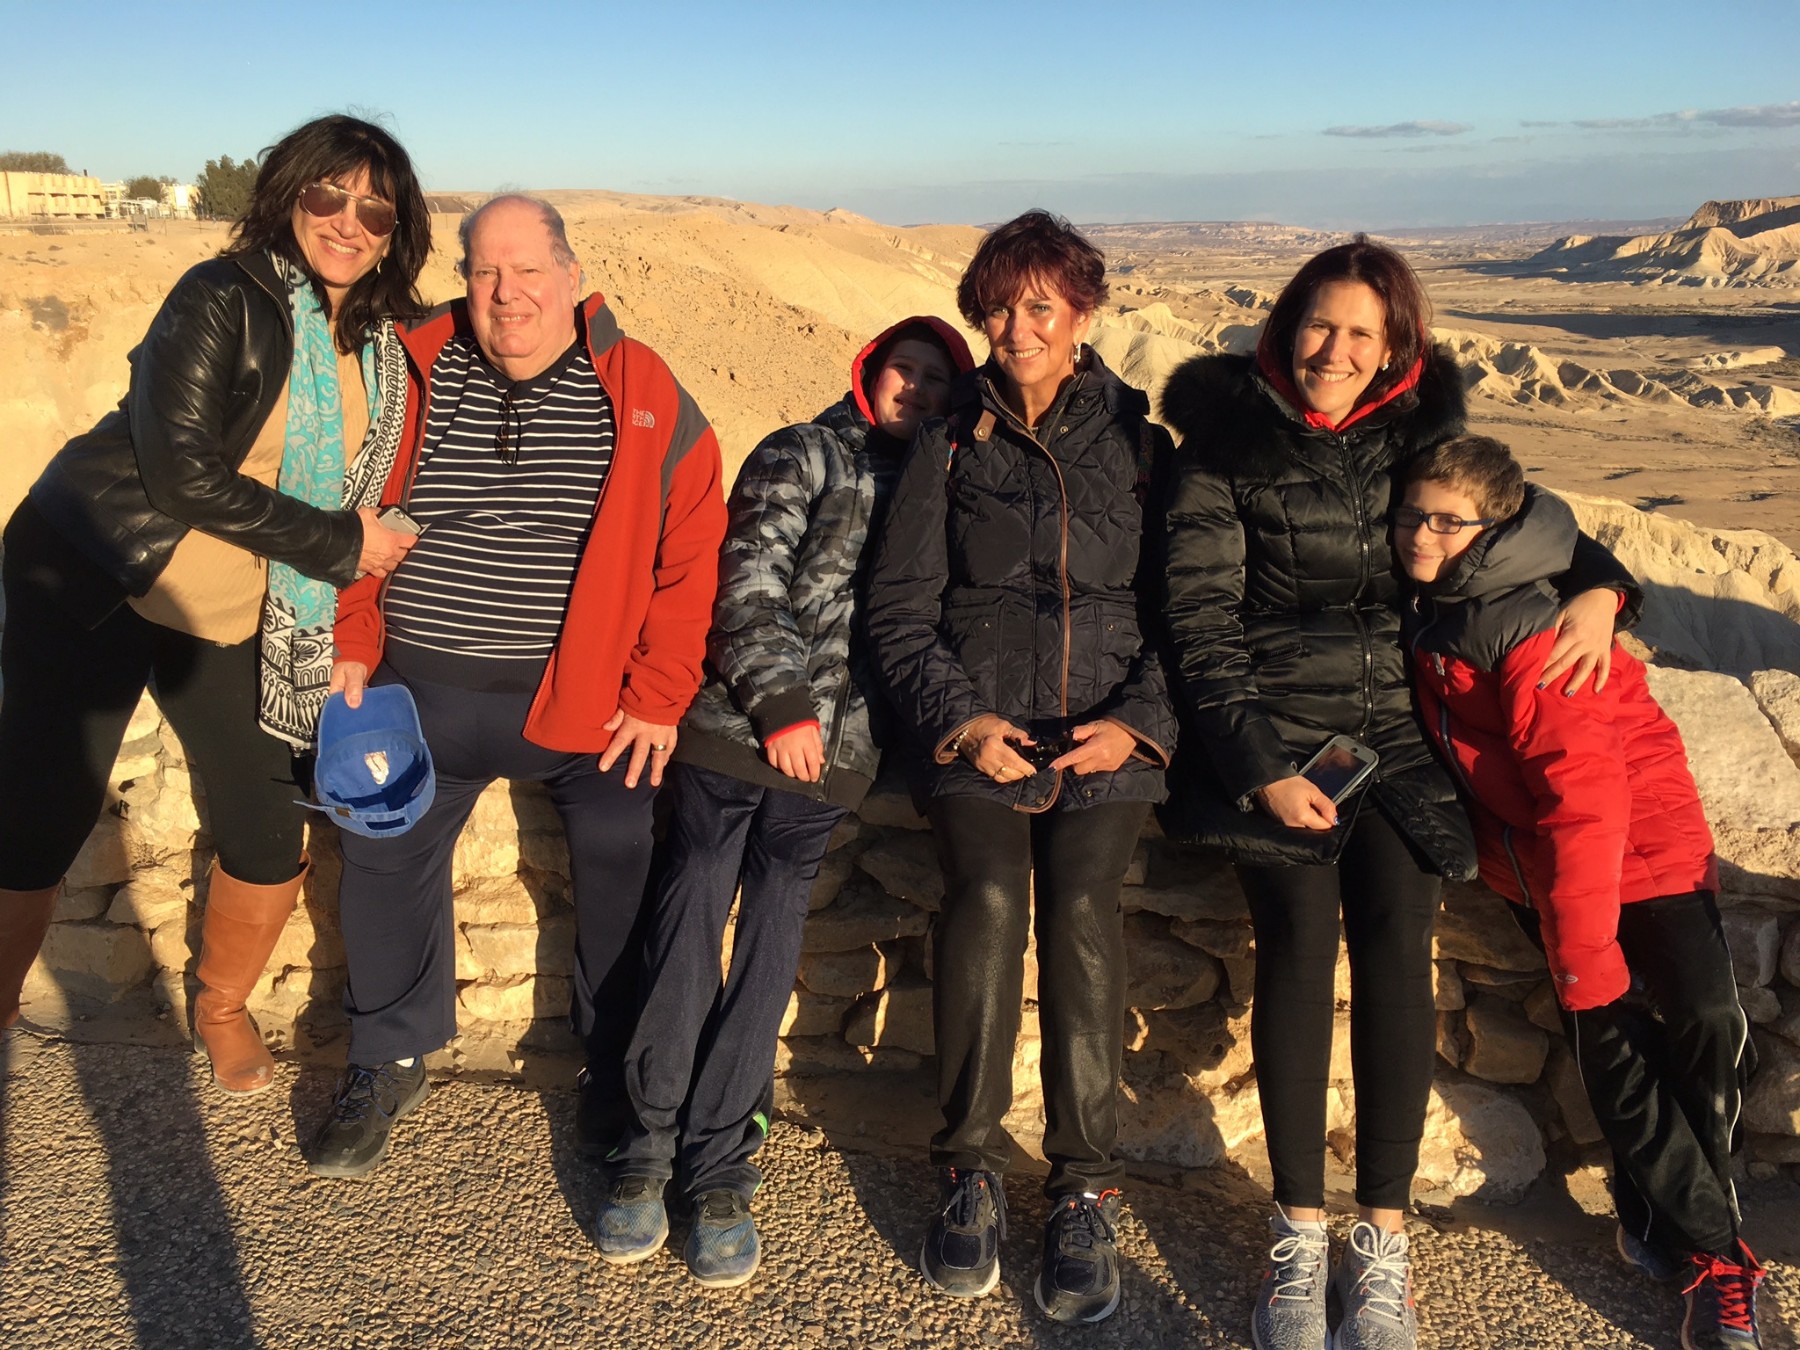 Class trip brings Tony and Gordette Oliva together, 53 years and